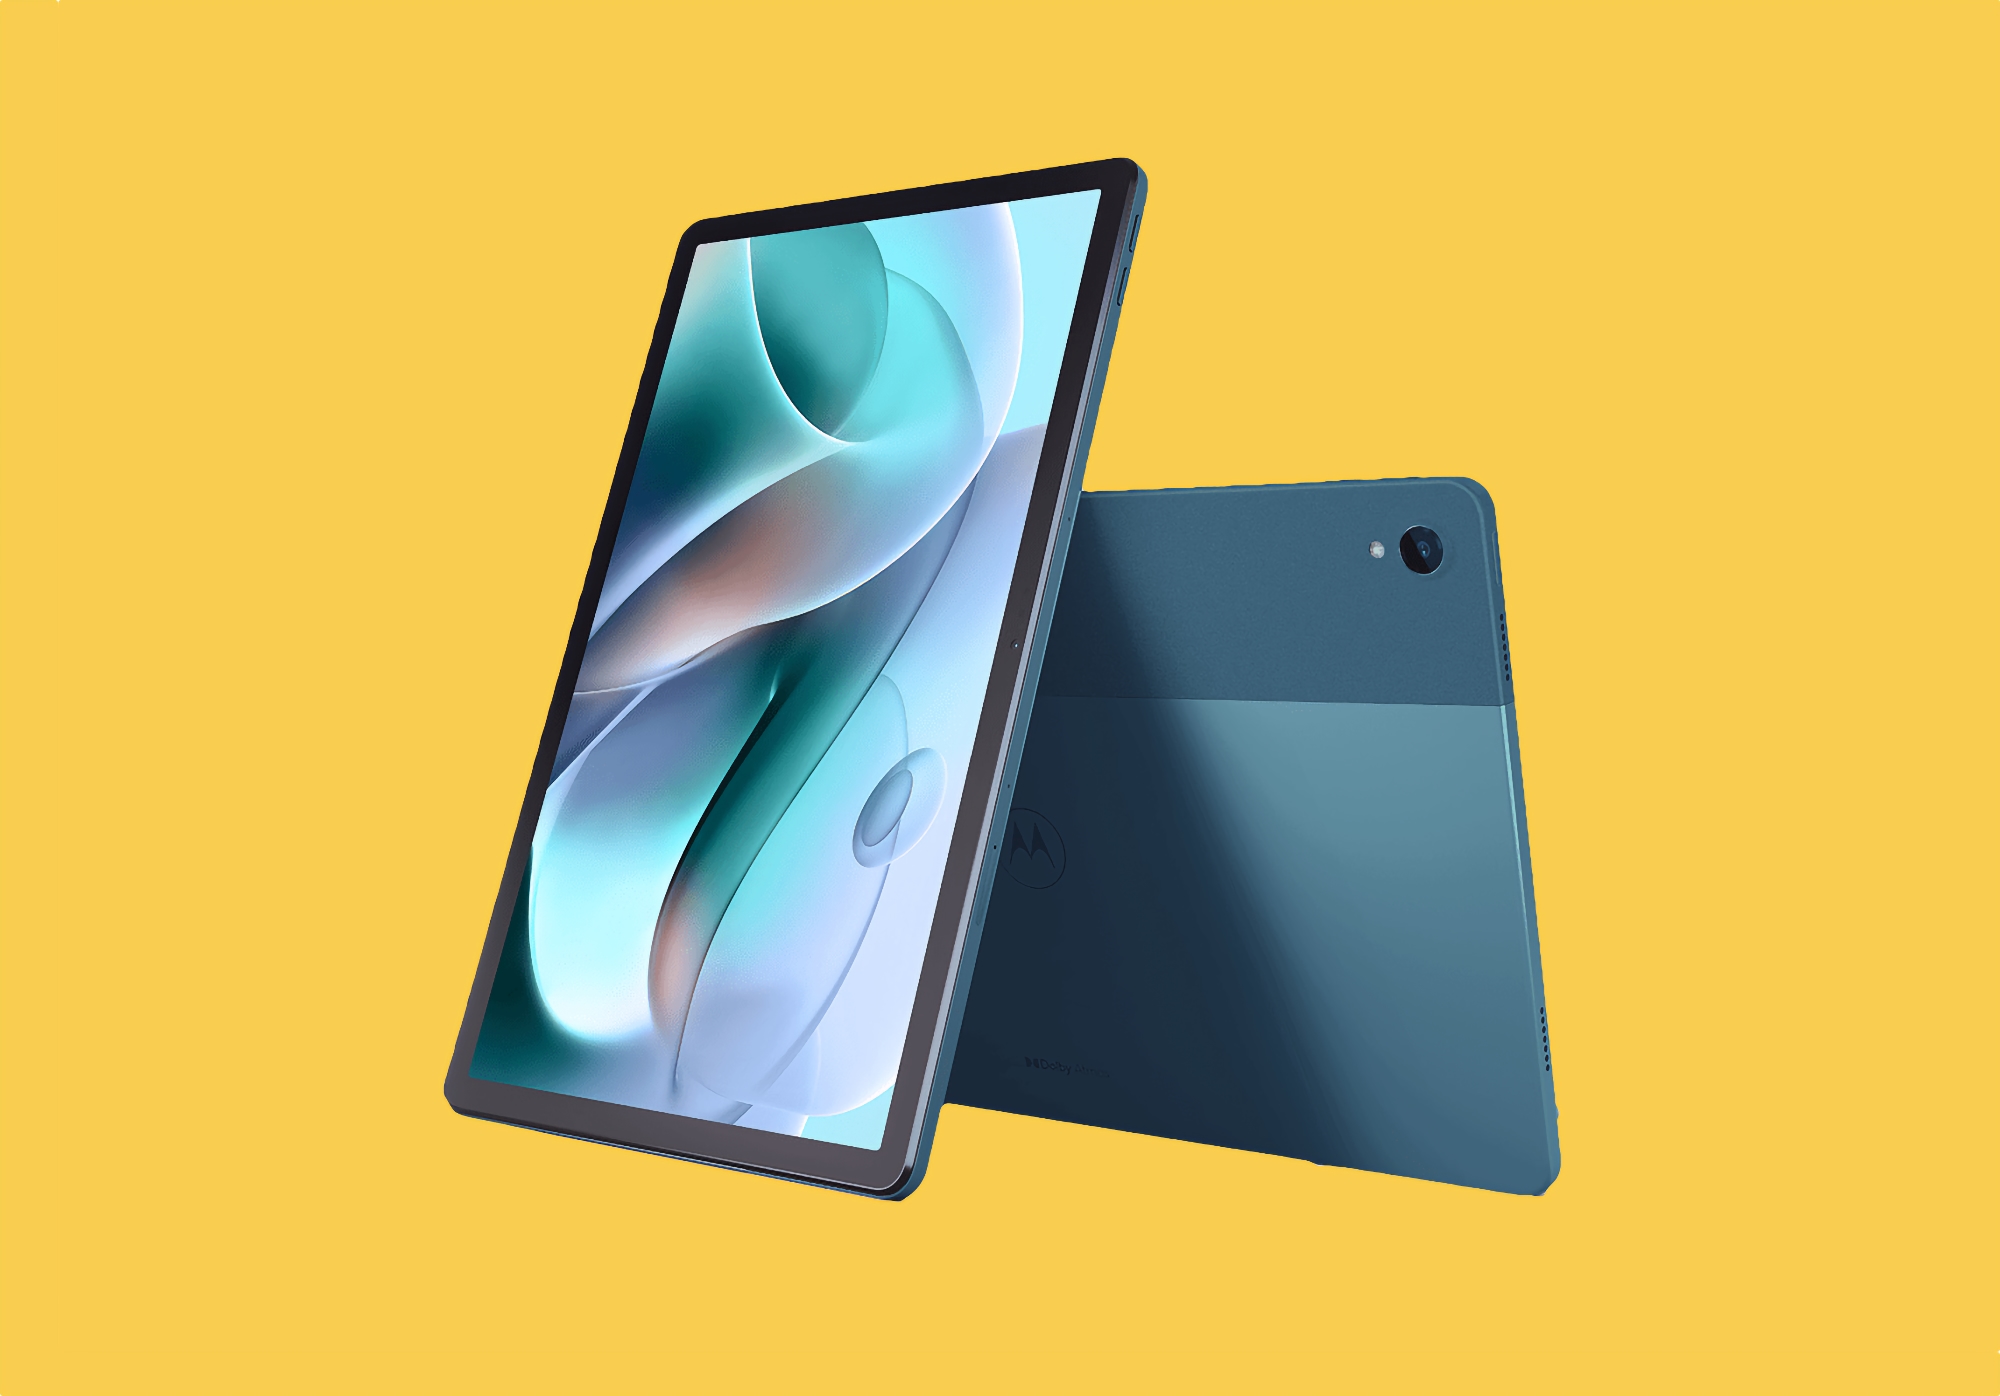 Motorola unveils Moto Tab G70: 11-inch tablet with MediaTek Helio G90T chip, four speakers, IP52 protection and 7700 mAh battery for $430